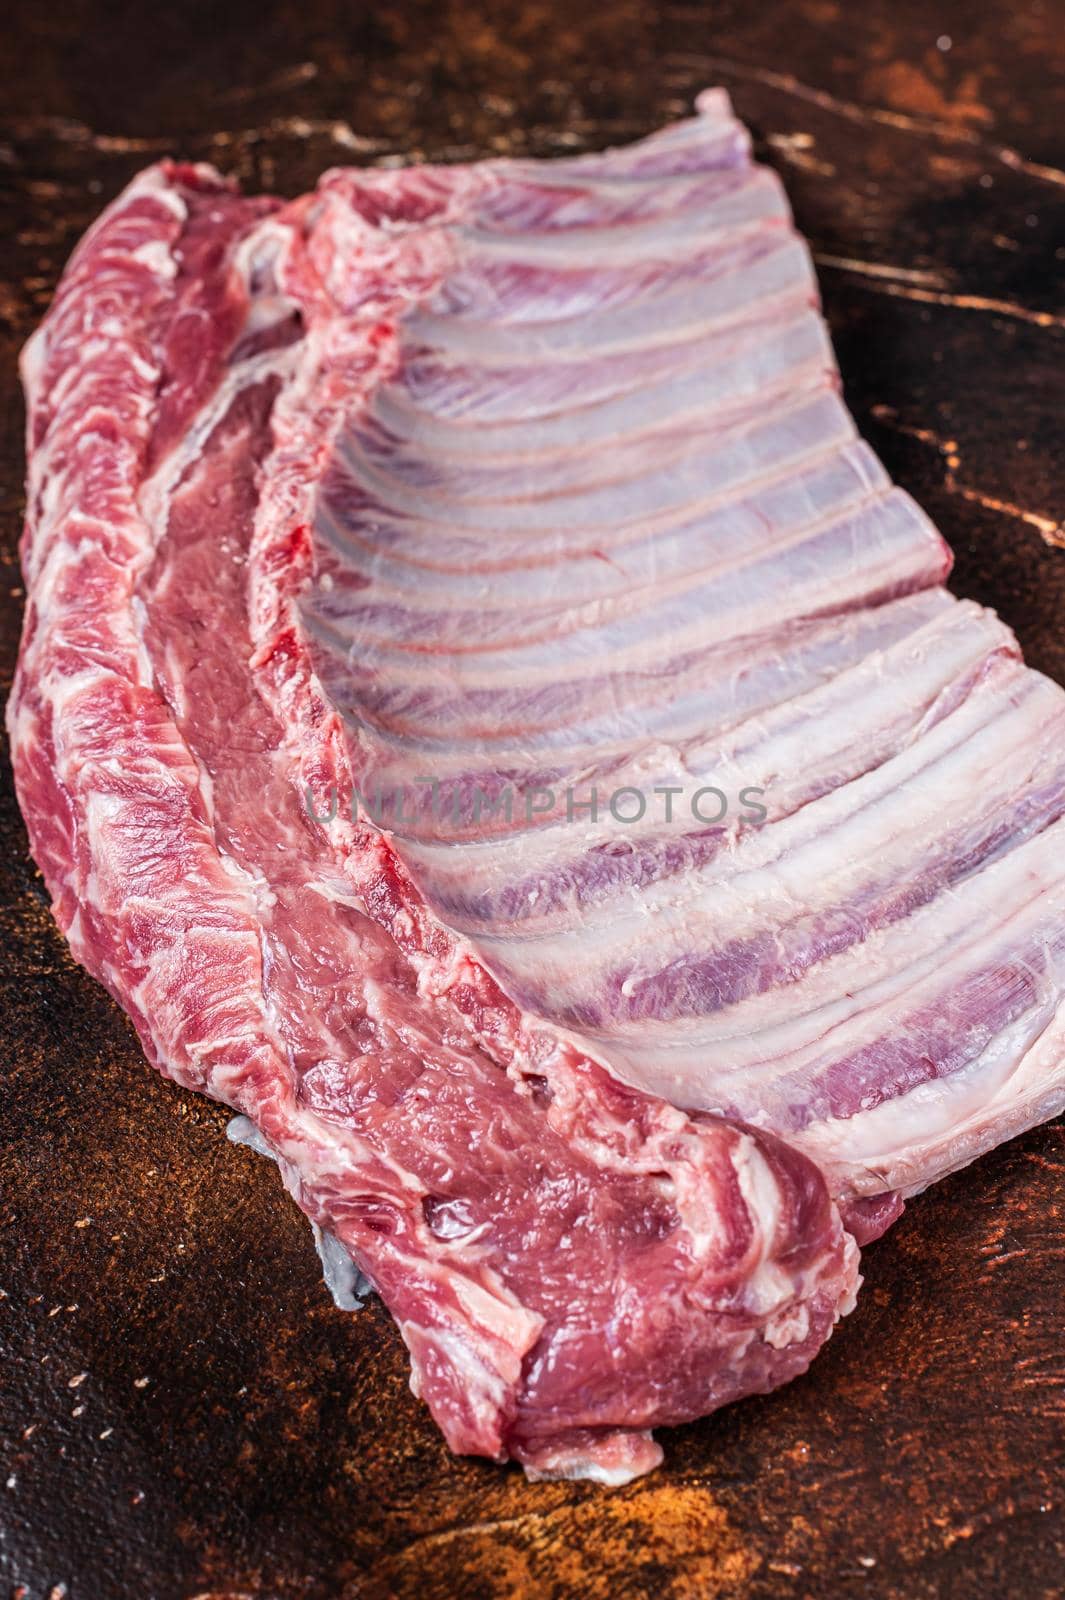 Raw rack of lamb ribs on butcher table. Dark background. Top view.